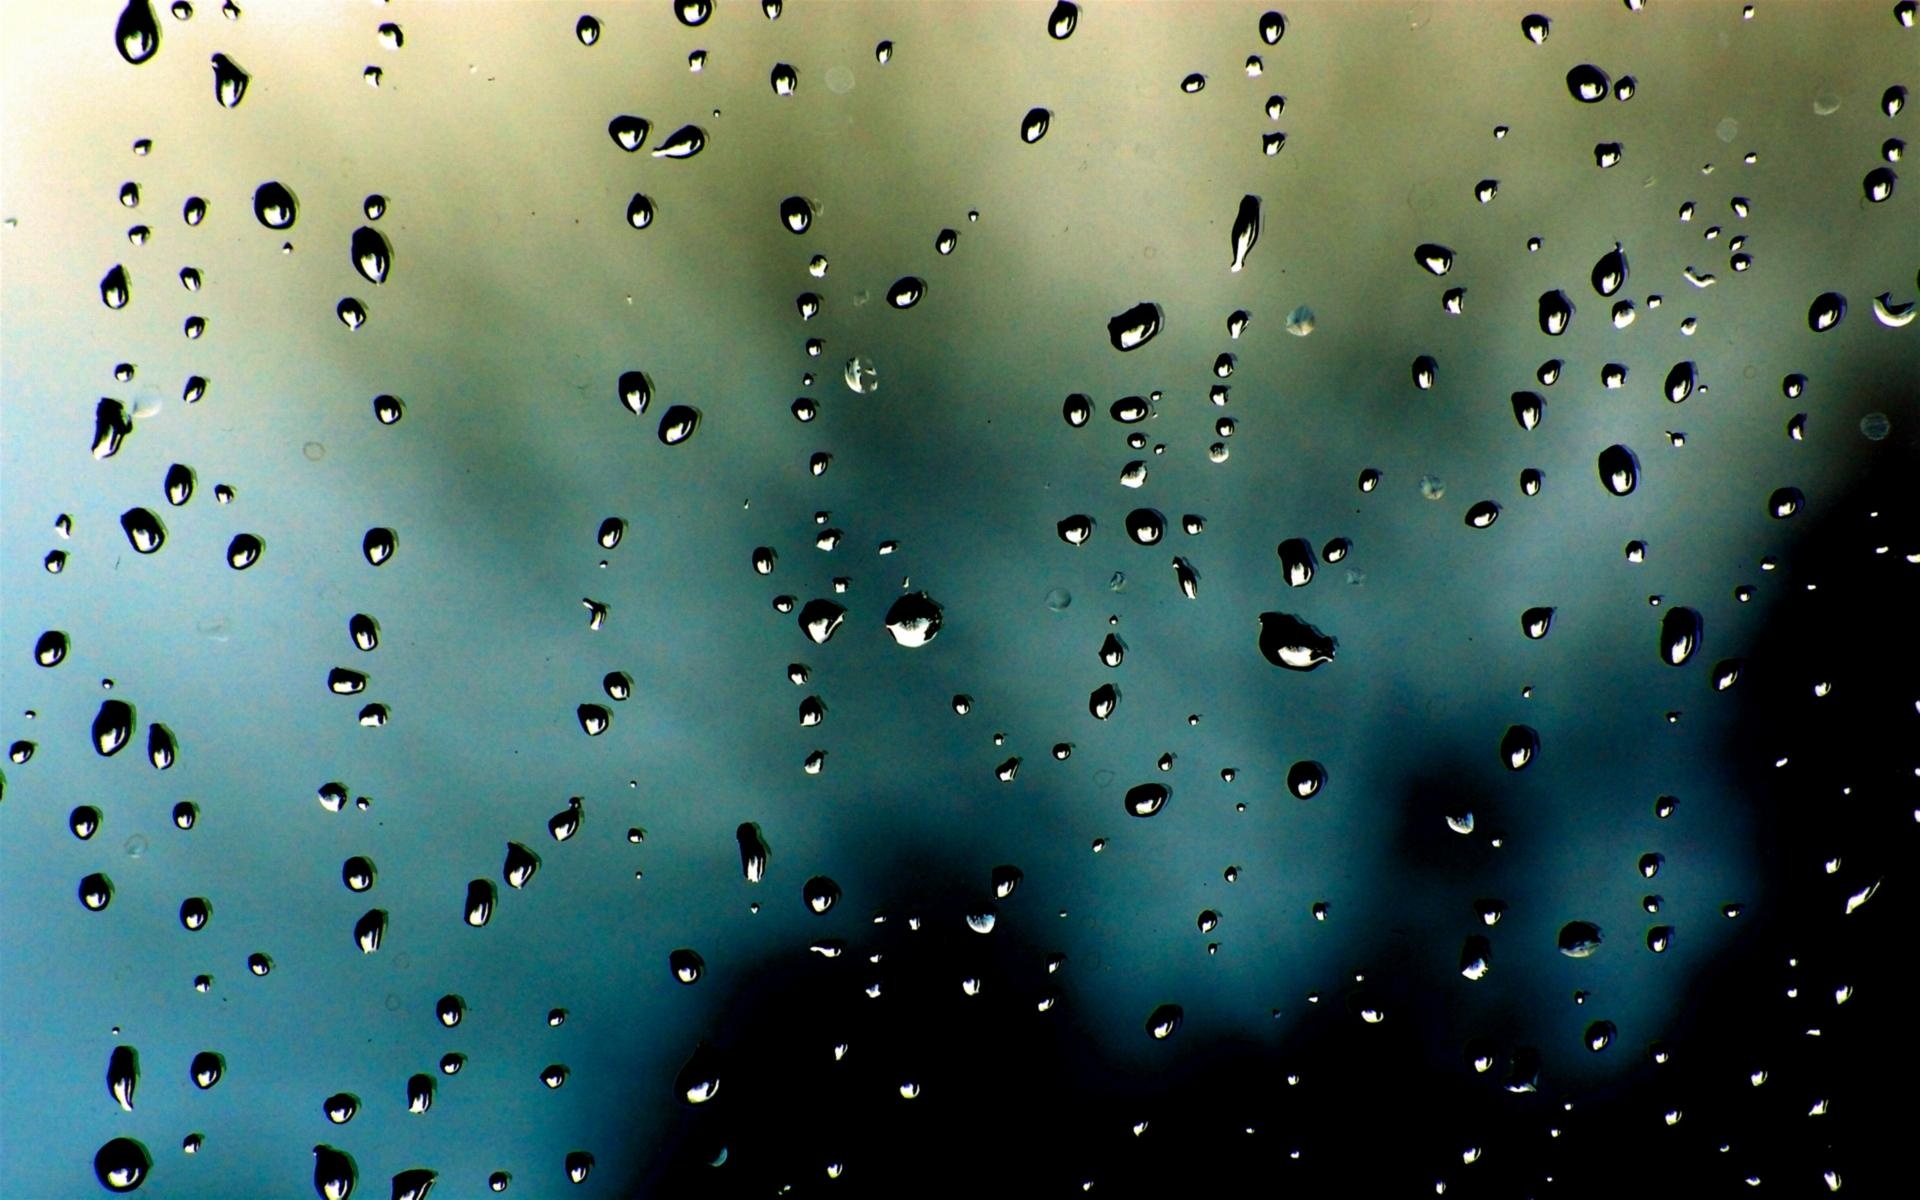 Small Water Drops on the Window (click to view)